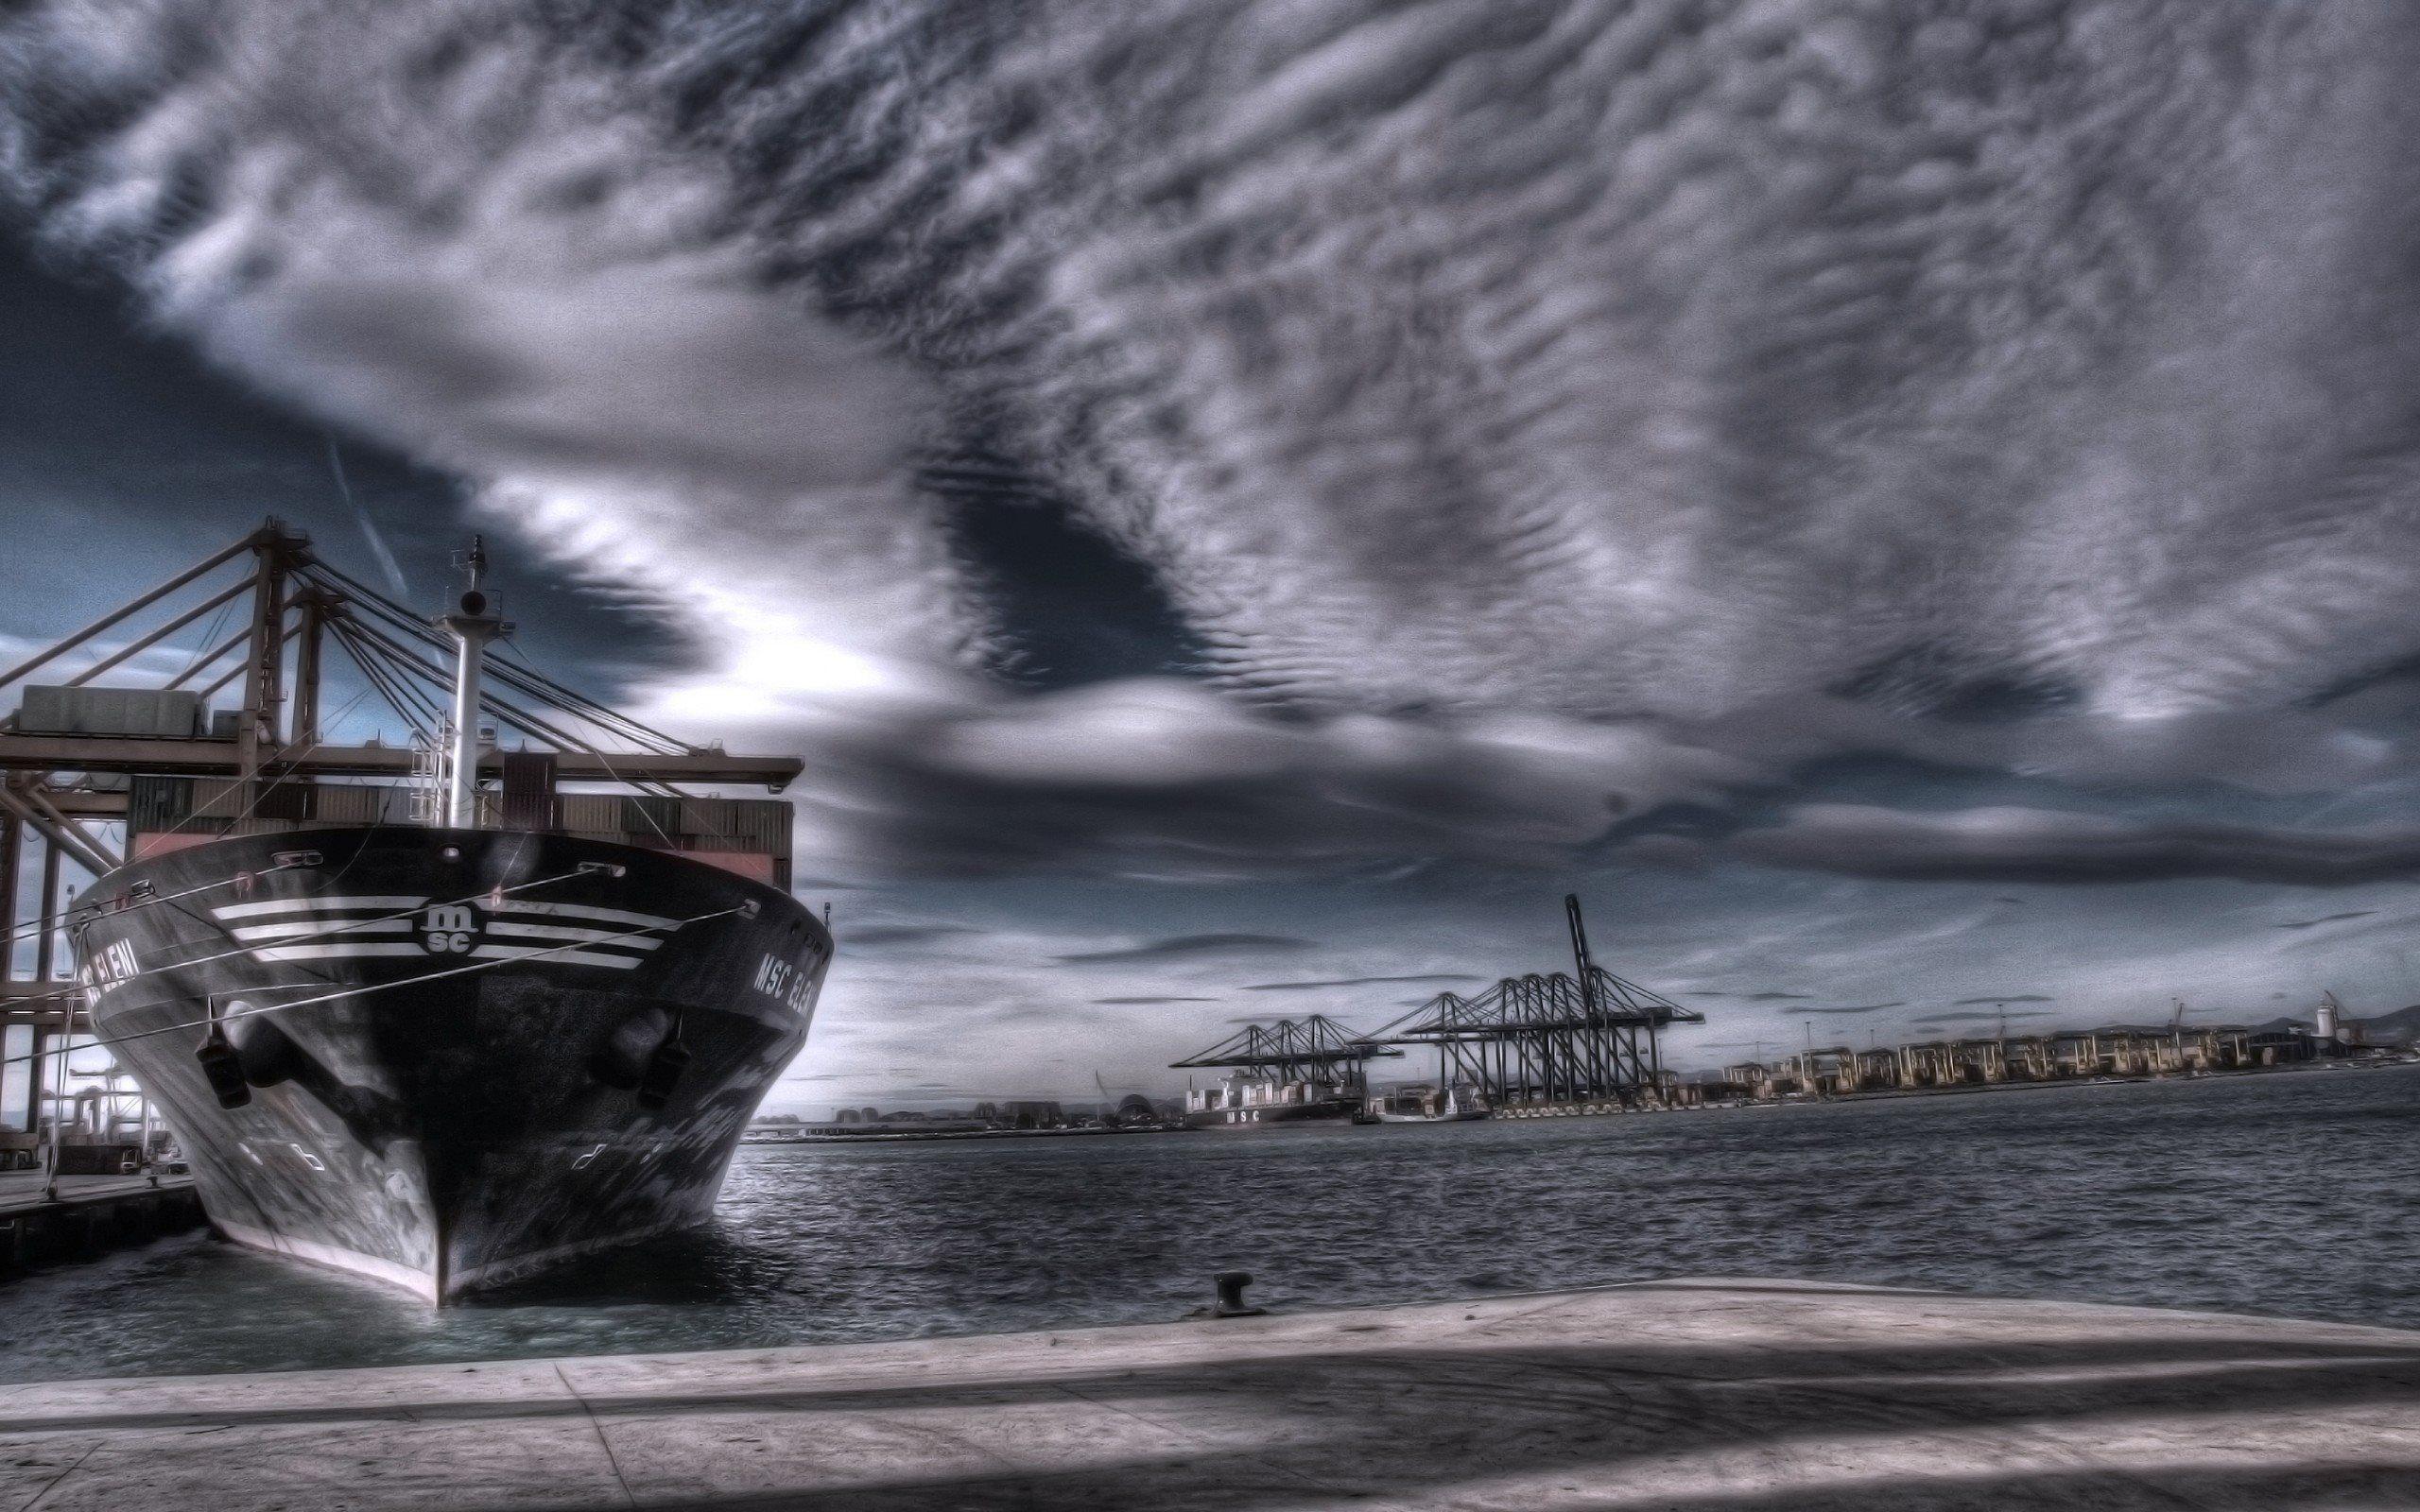 Download wallpaper eleni, msc, a container ship, port, hdr for desktop with resolution 2560x1600. High Quality HD picture wallpaper